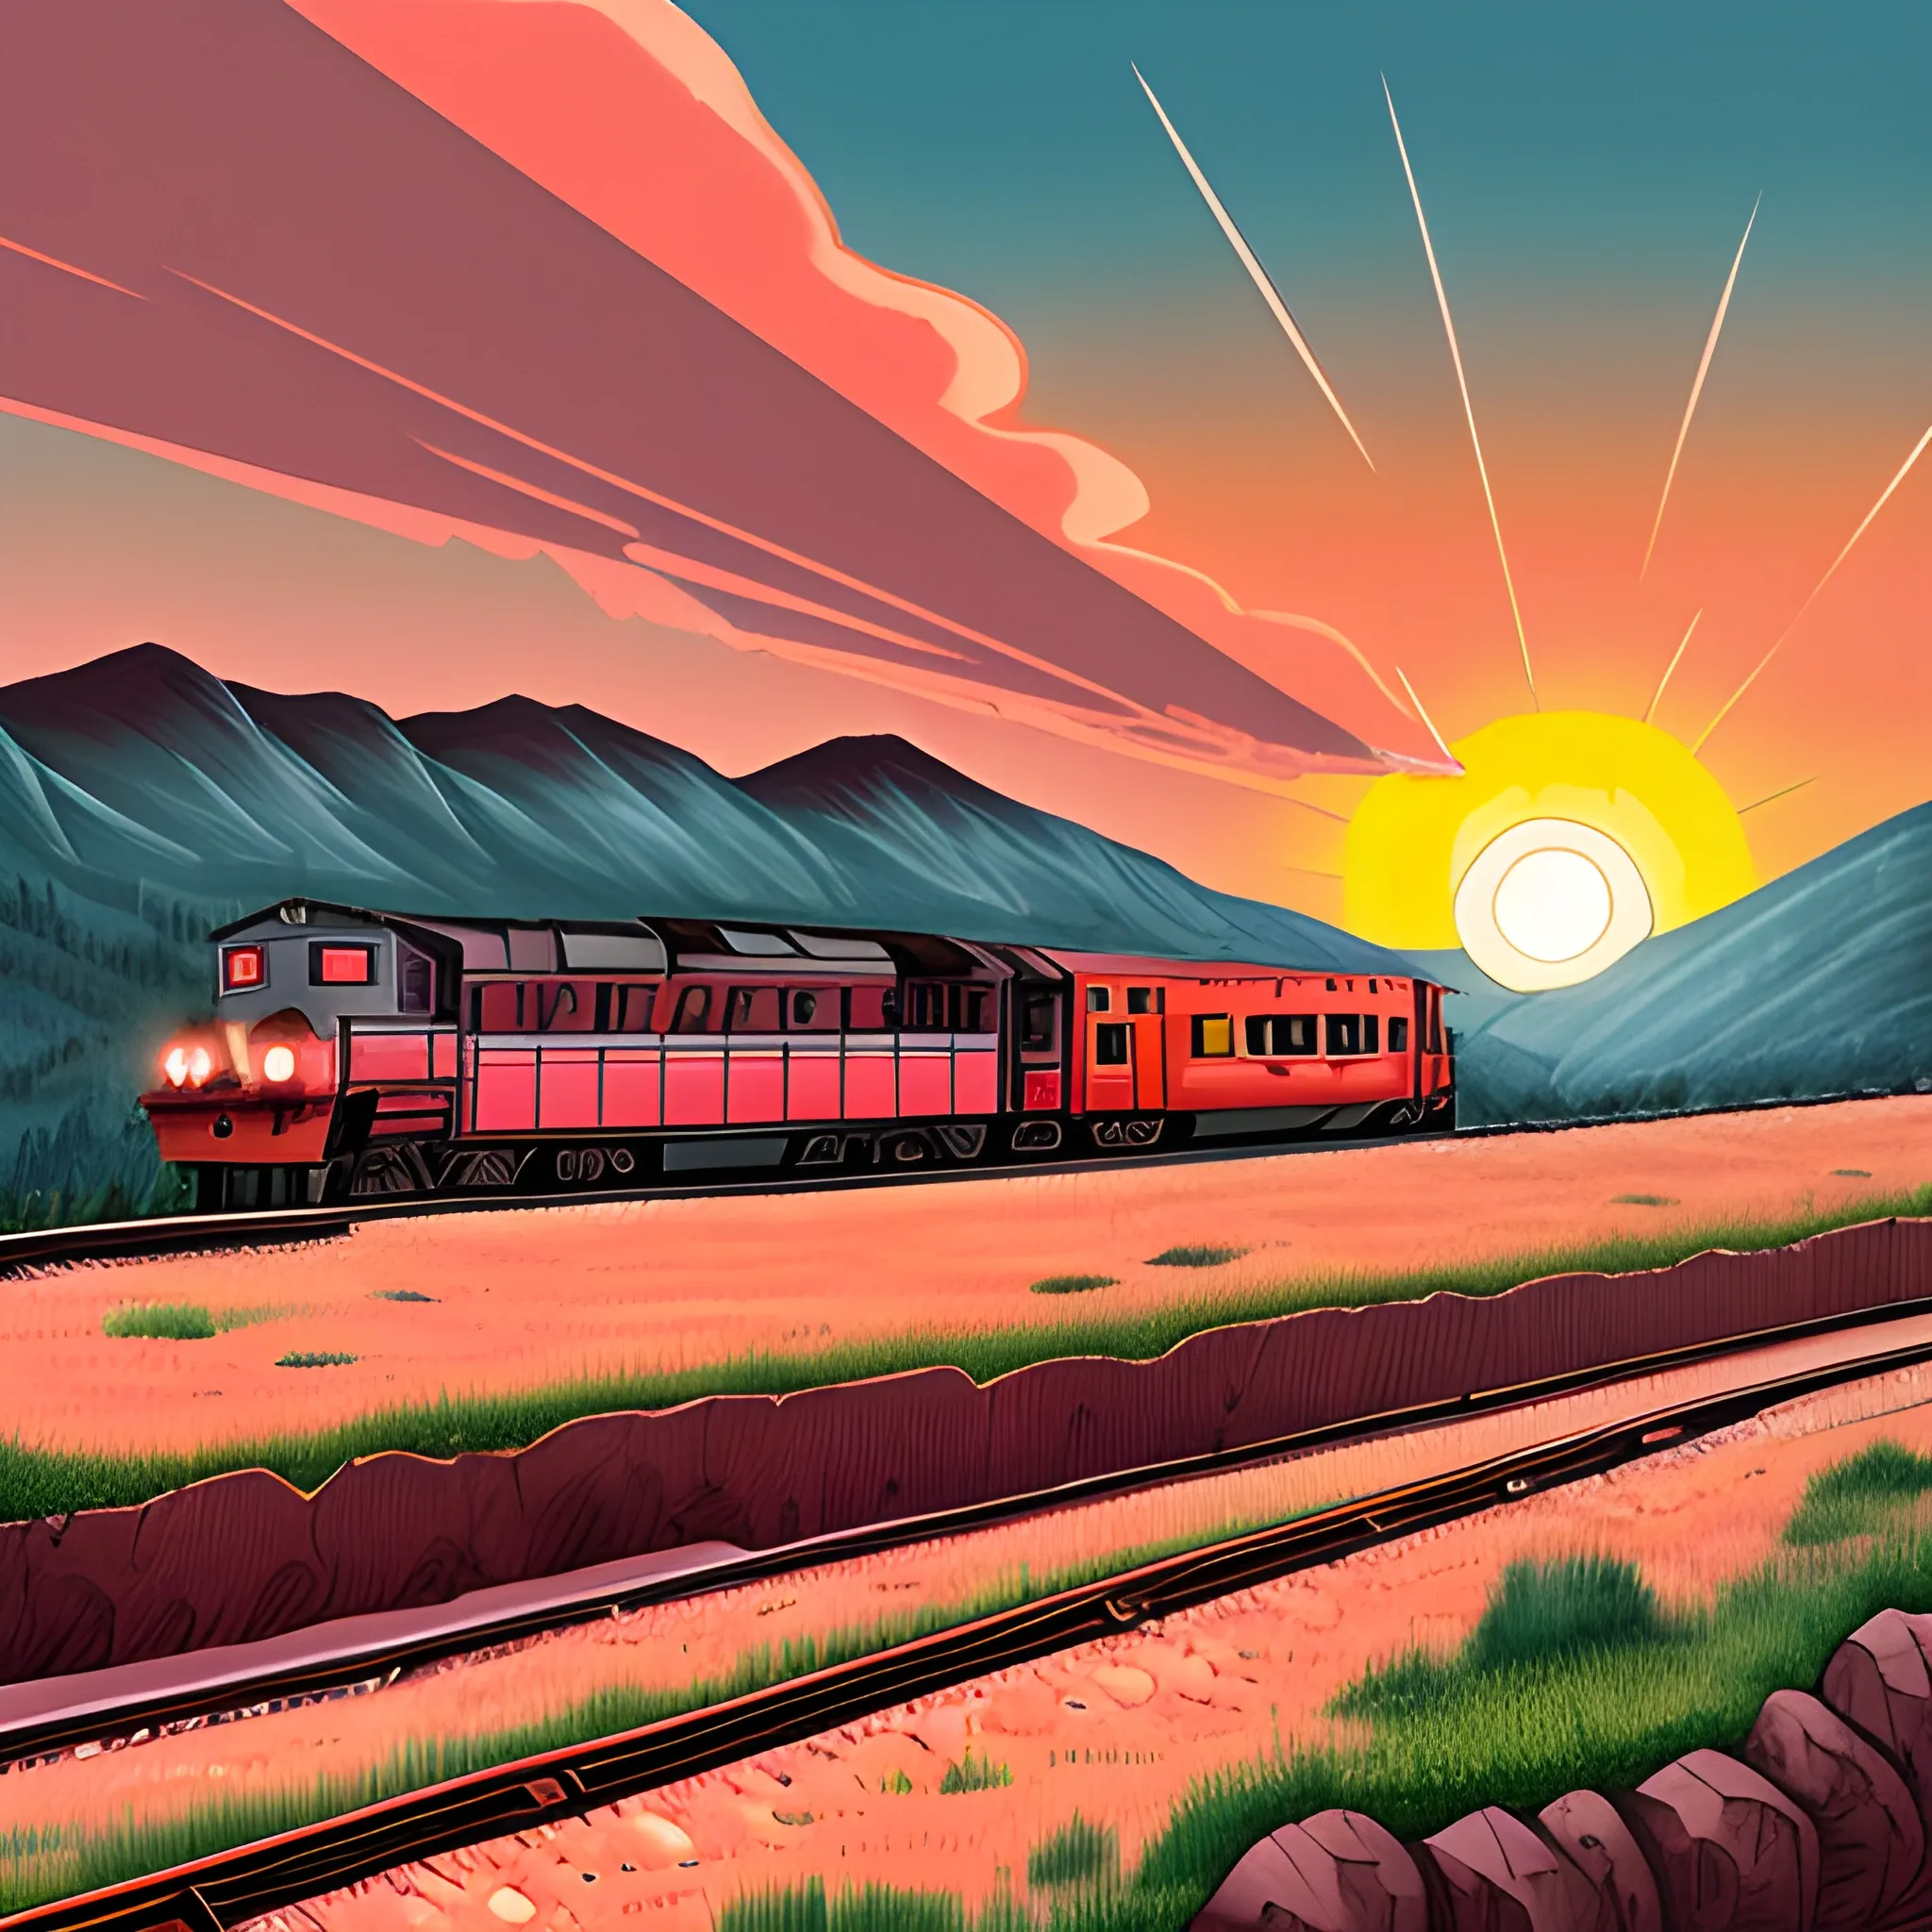 a scen of a train comming from between from mountains and hills and sun rise  behind it with red sky and clouds, Cartoon